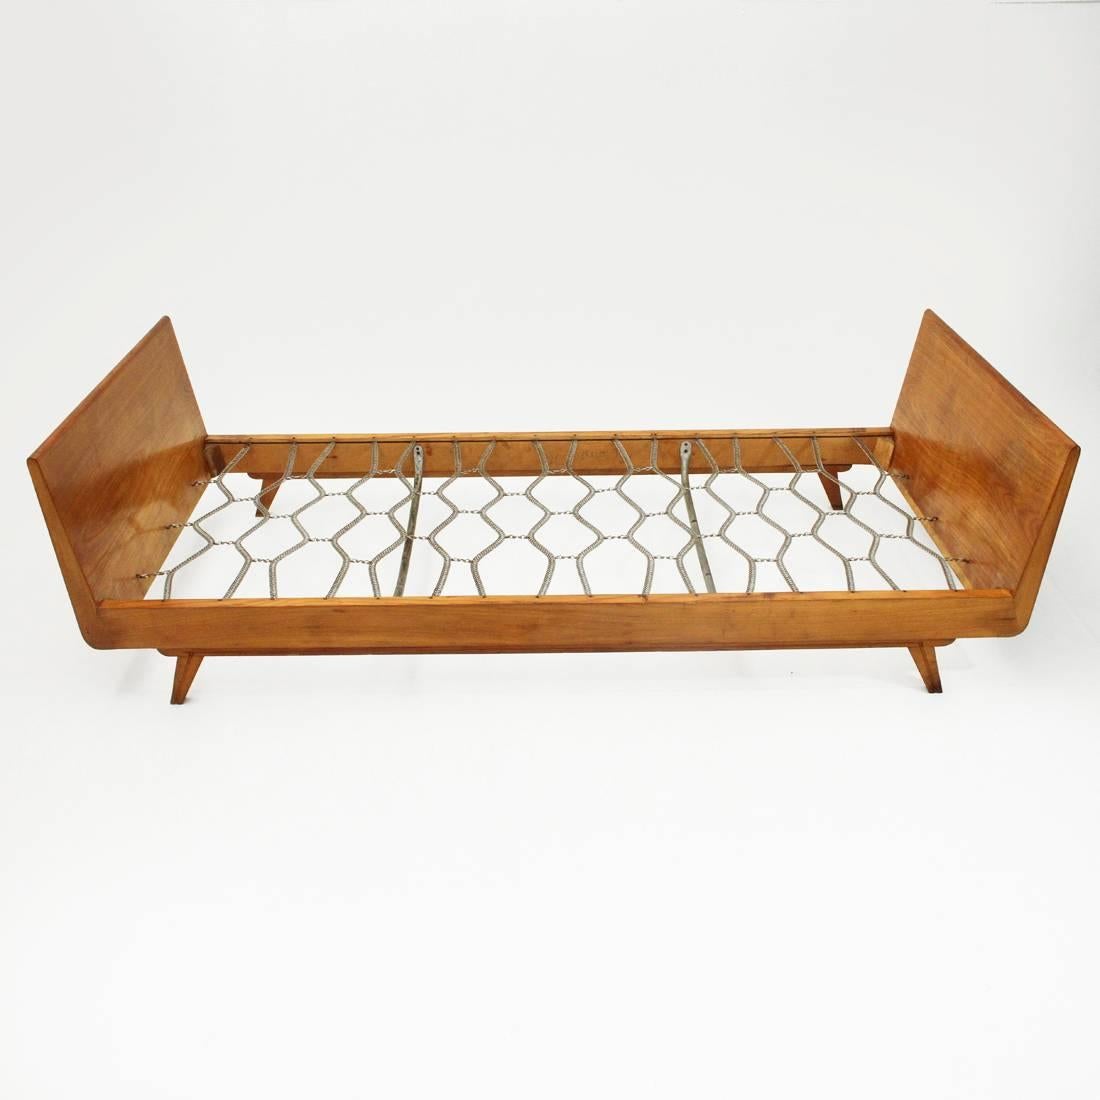 Italian bed produced in the 1950s.
Can also be used as a daybed.
Wood veneer structure.
Tapered headboard and footboard.
Metal net.
Good general conditions, some signs and lack of veneer due to normal use over time.

Dimensions: Length 203